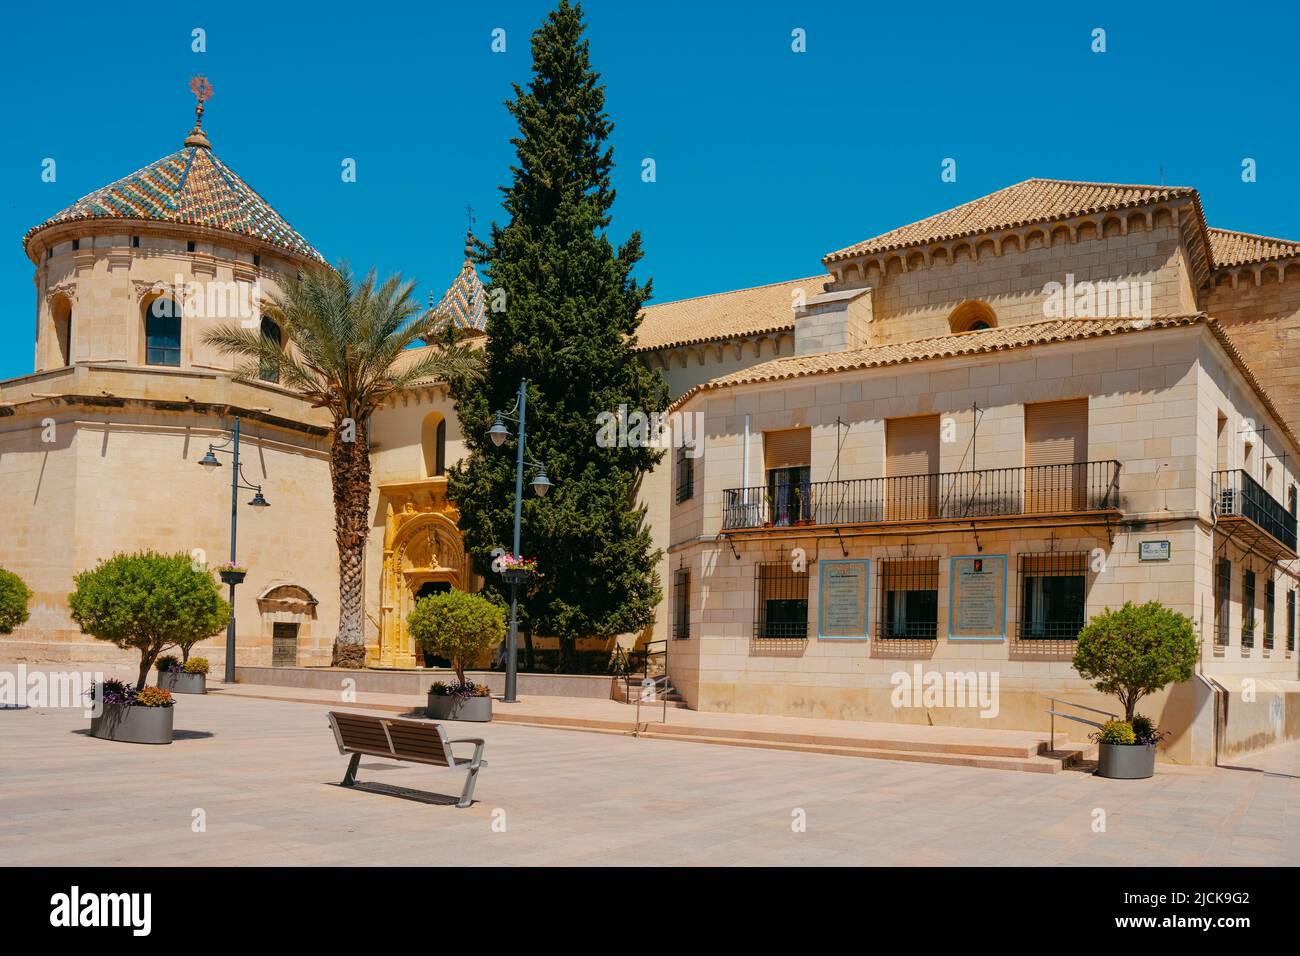 Lucena, Spain - May 27, 2022: A side view of the Parroquia de San Mateo church in Lucena, Spain, and its secondary portal, leading to the Plaza de San Stock Photo